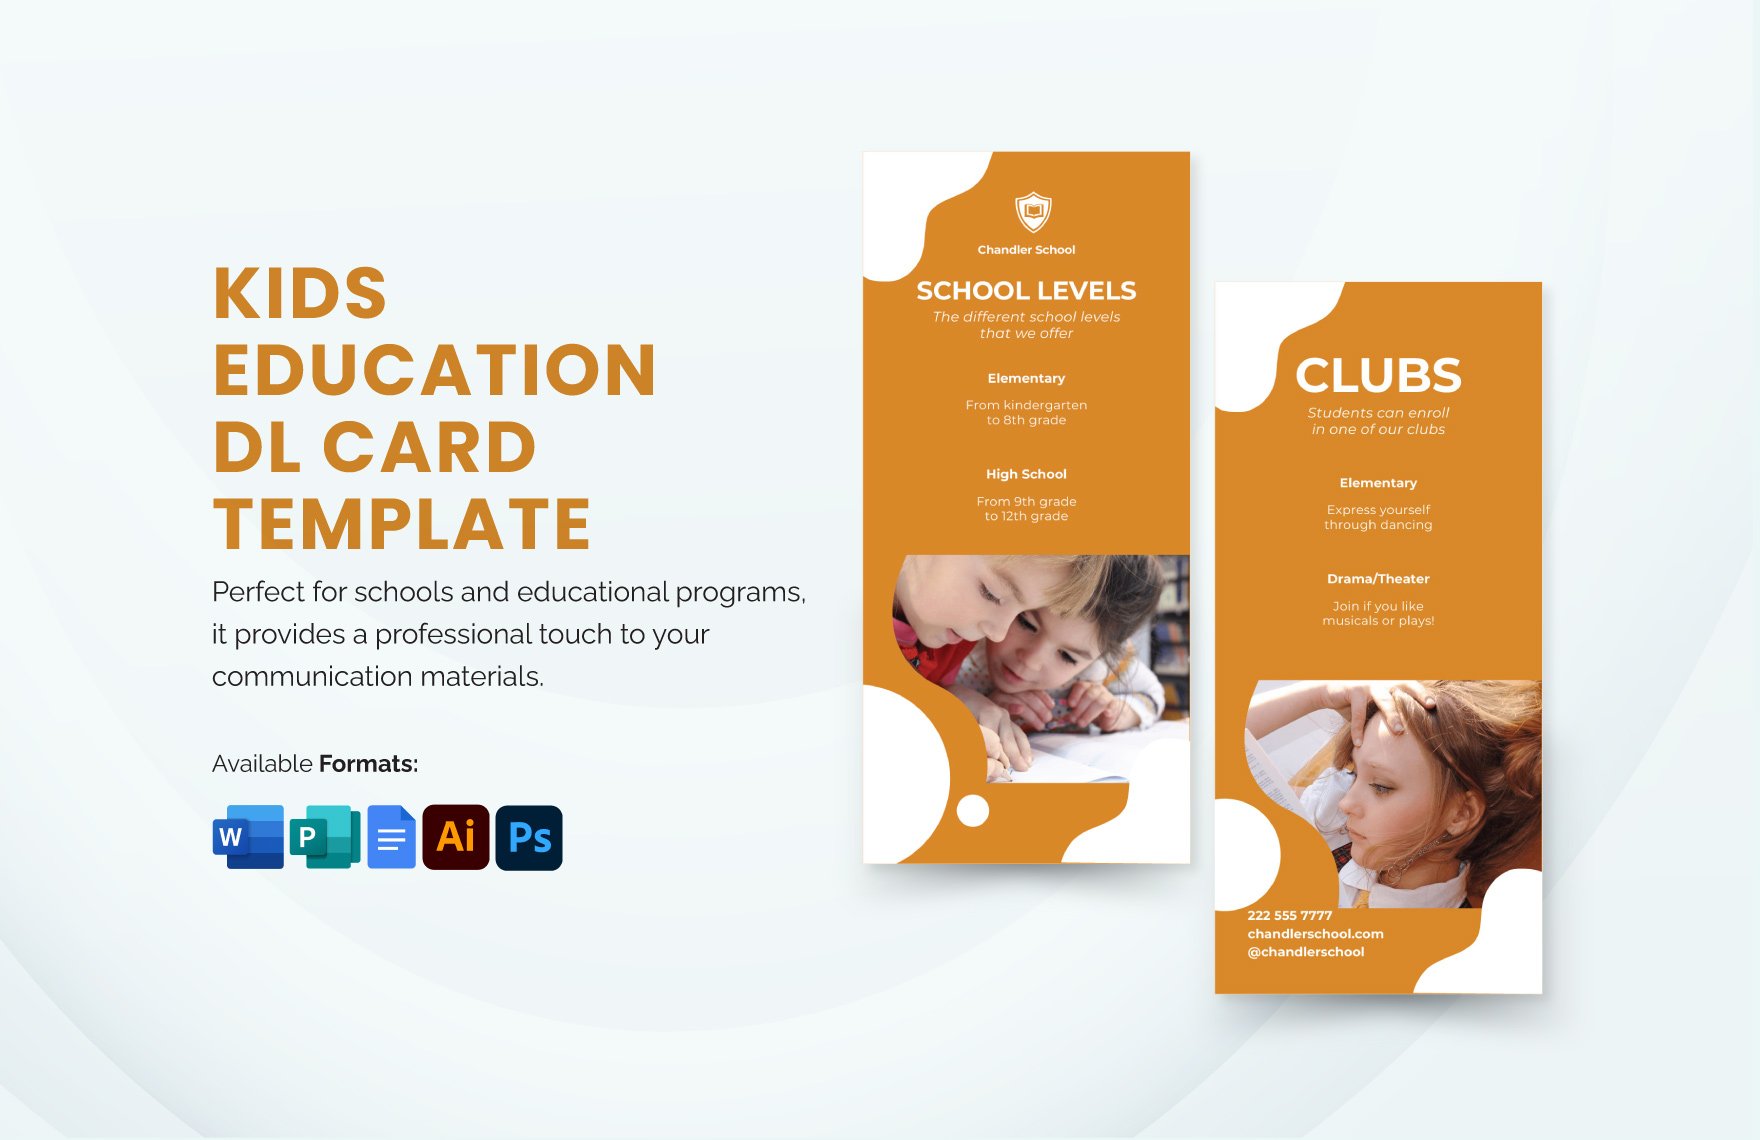 Kids Education DL Card Template